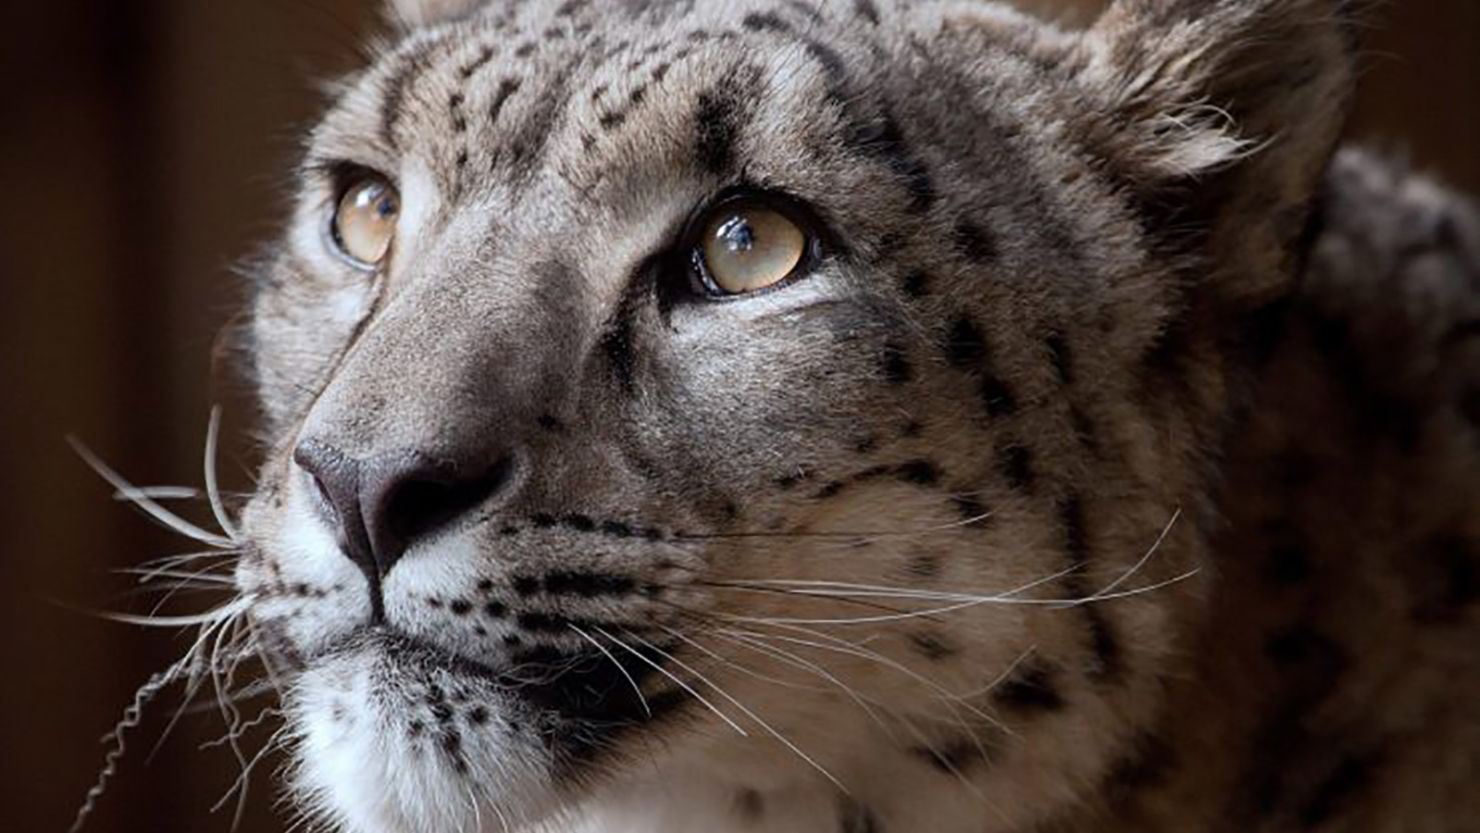 Margaash was shot dead at Dudley zoo on October 23, after he escaped his enclosure, zoo officials said. 